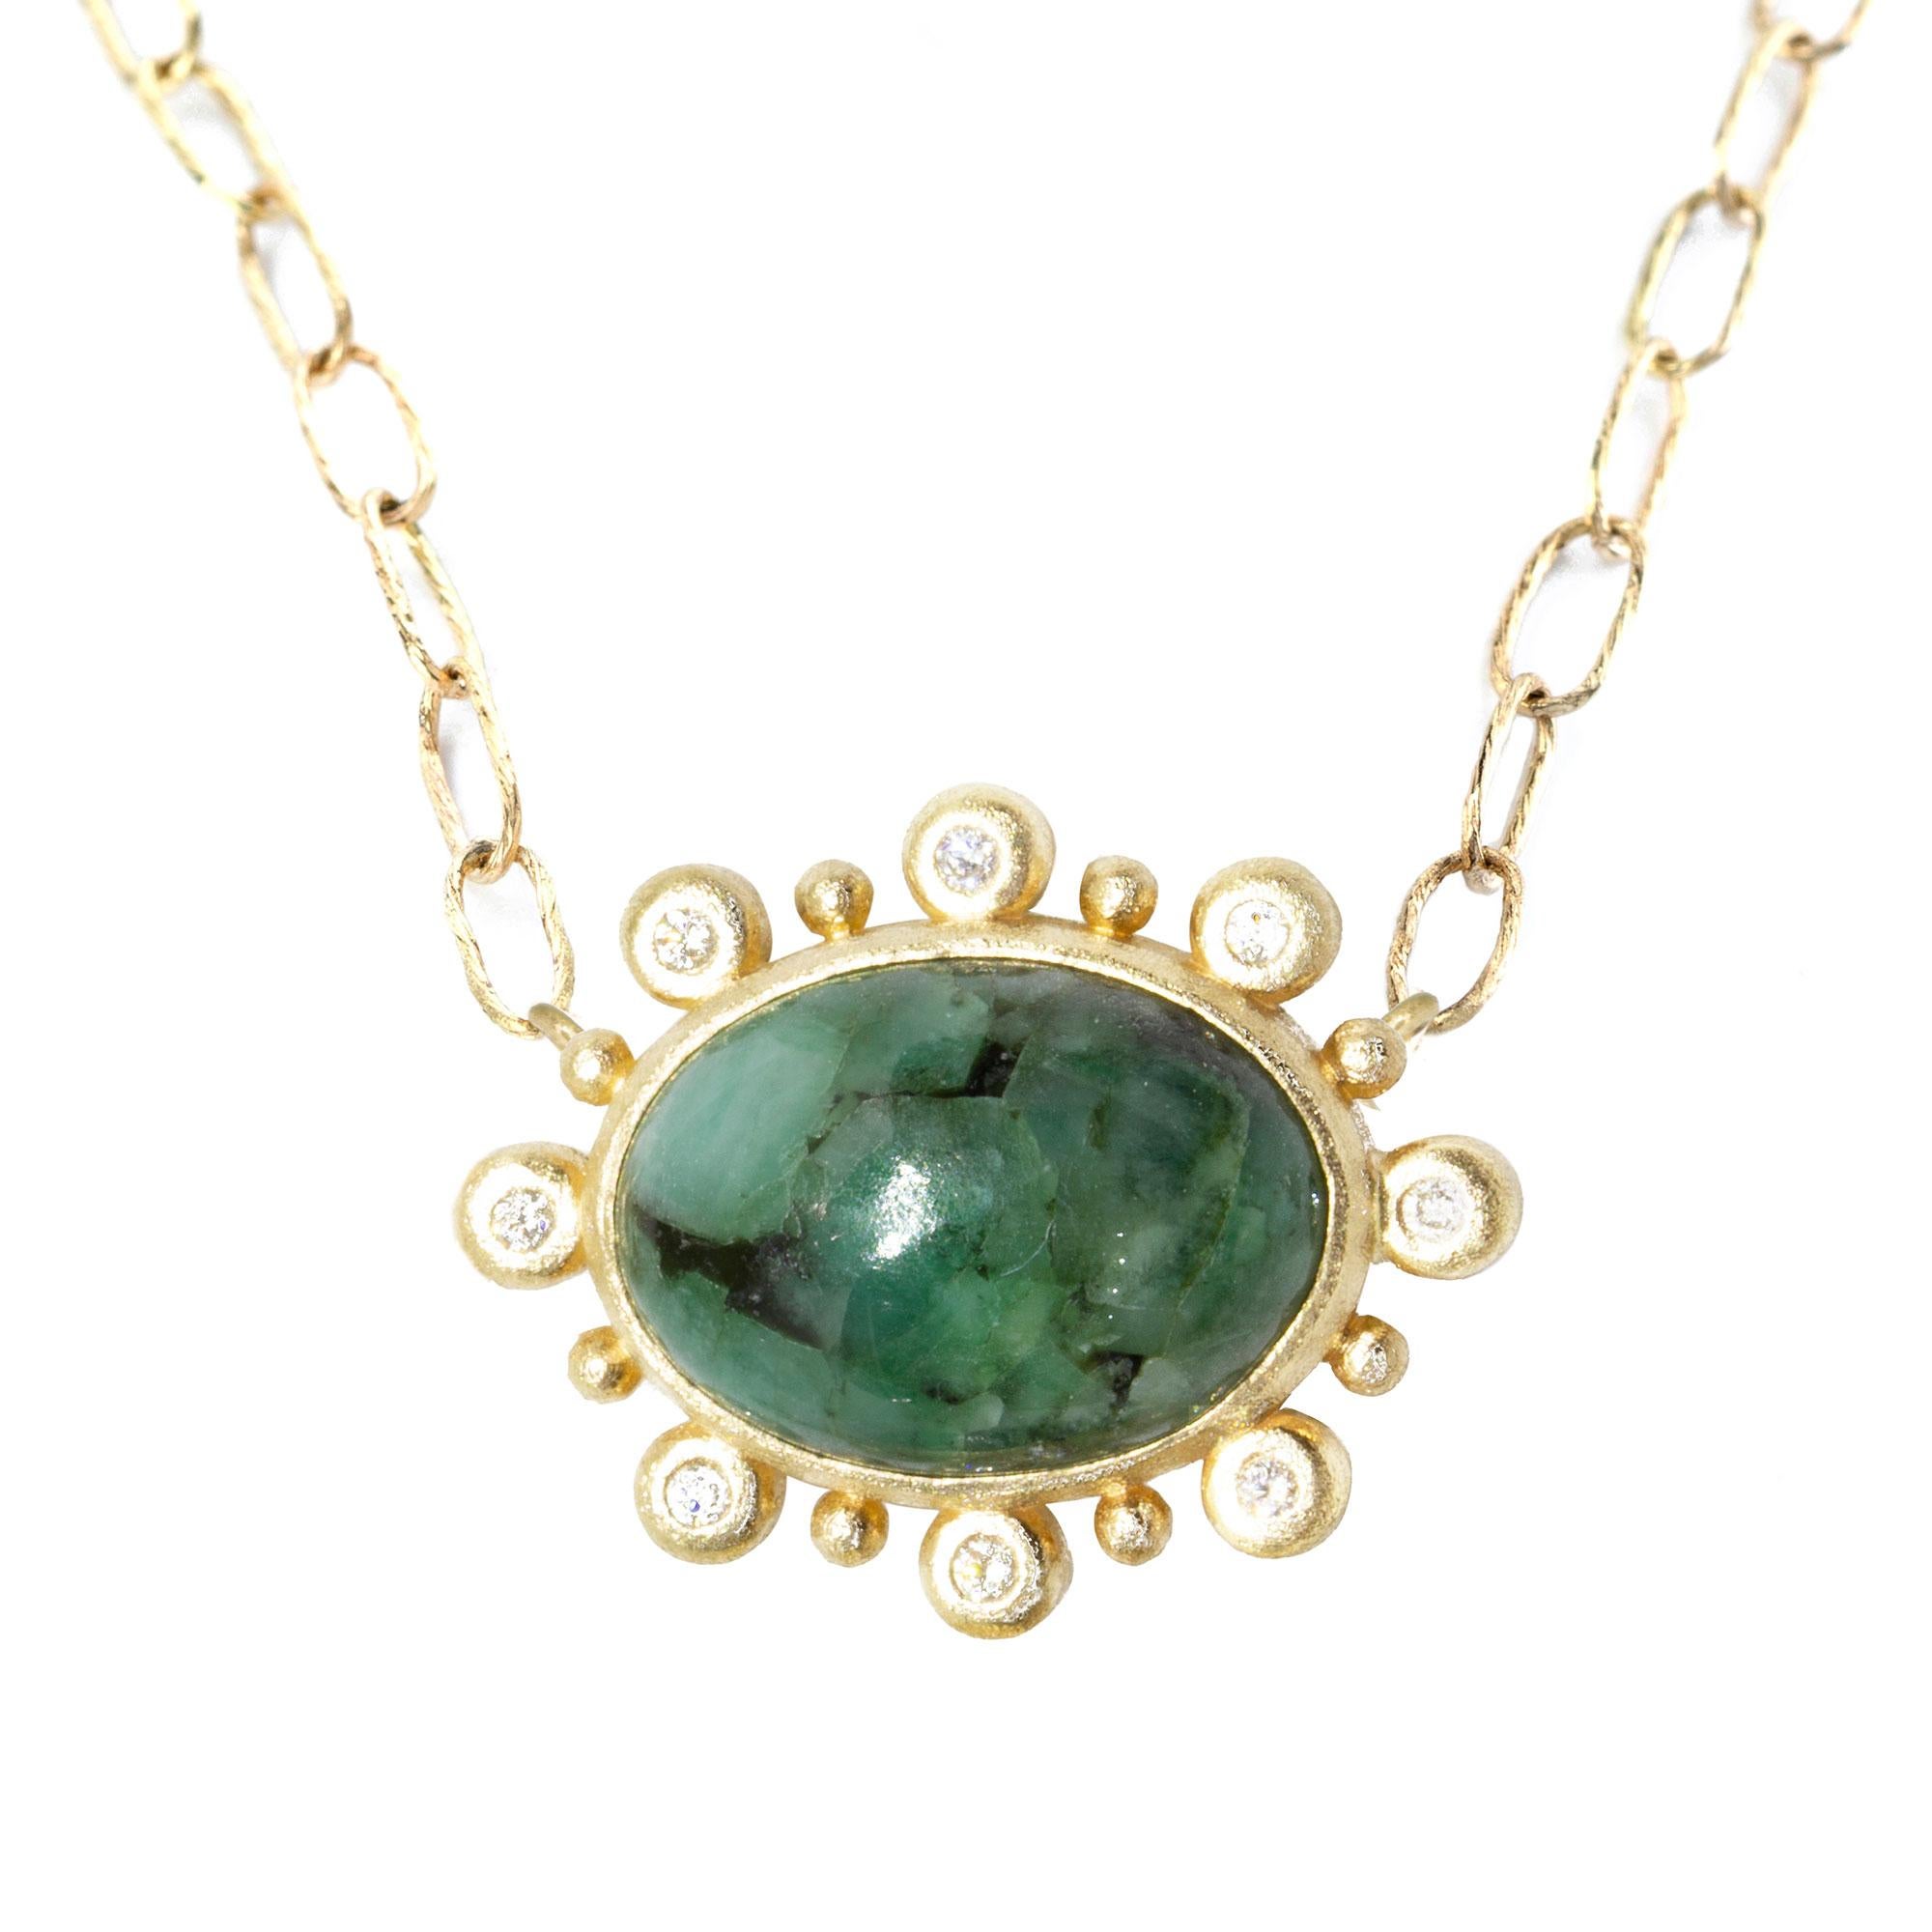 Details
Metal: 18K Yellow Gold
Stone carat: 6
Diamond carat: 0.08
Length:
Stone size: 14x10mm

About the stones:
Genuine Emerald: A variety of the beryl mineral family, emerald is a rare and highly sought-after precious gemstone that gets its green